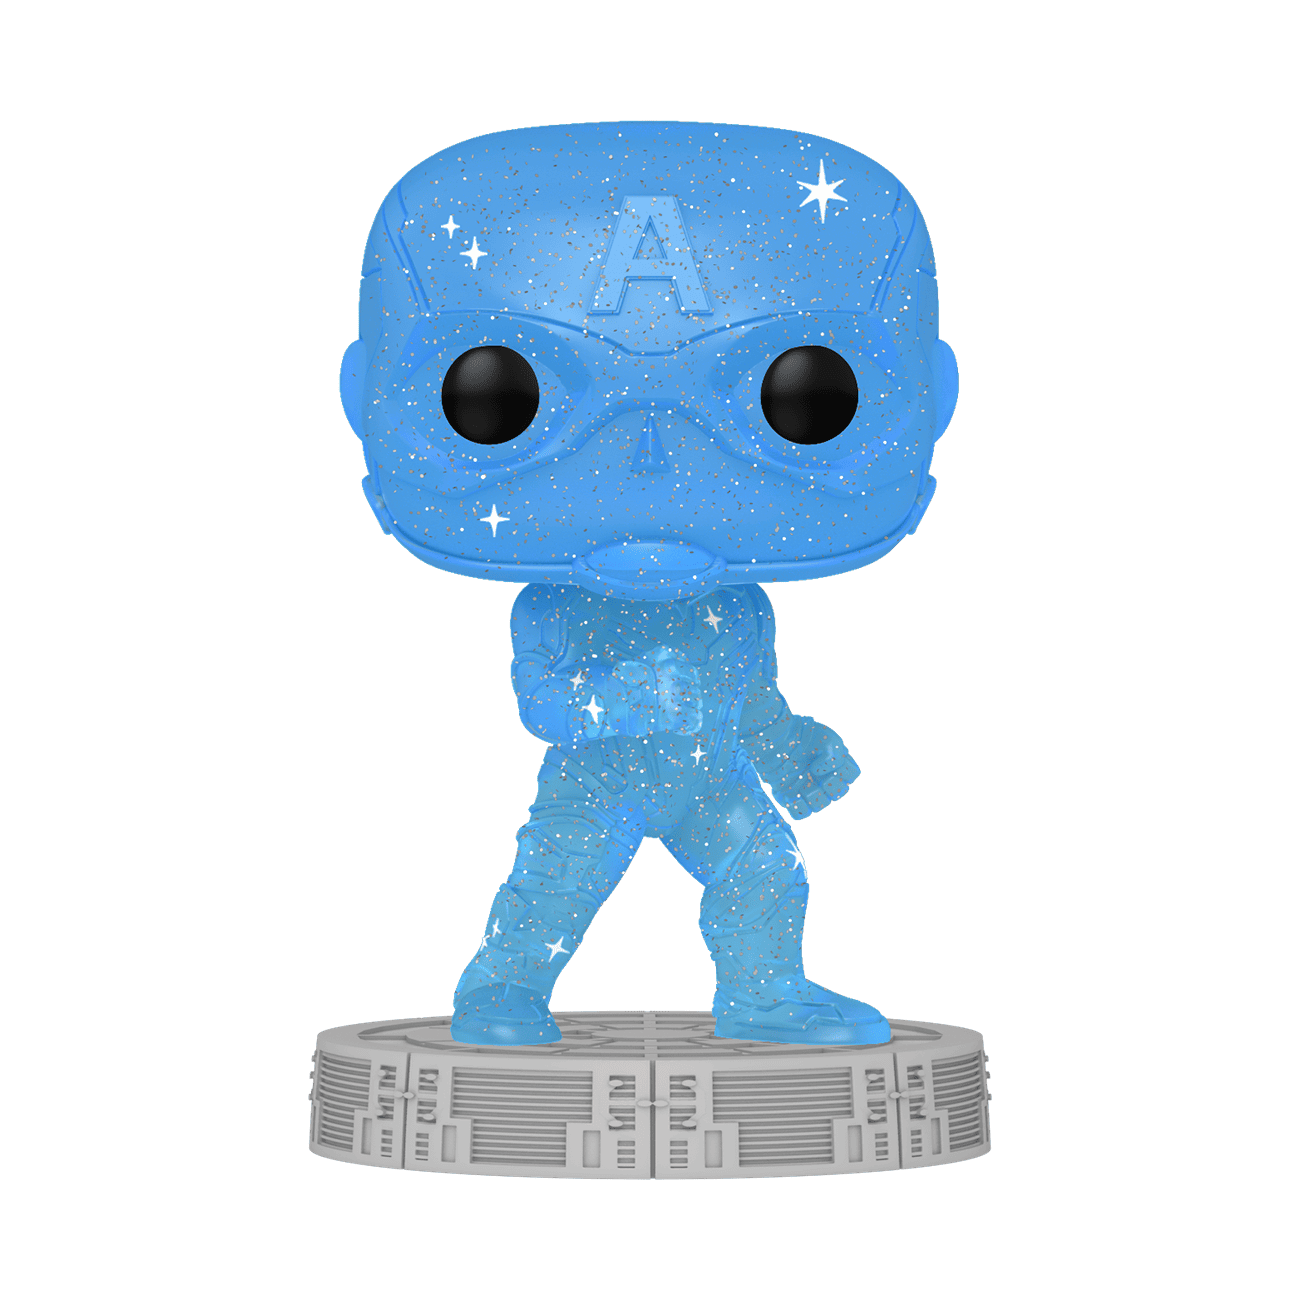 Buy Pop! Artist Series Captain America with Protector at Funko.